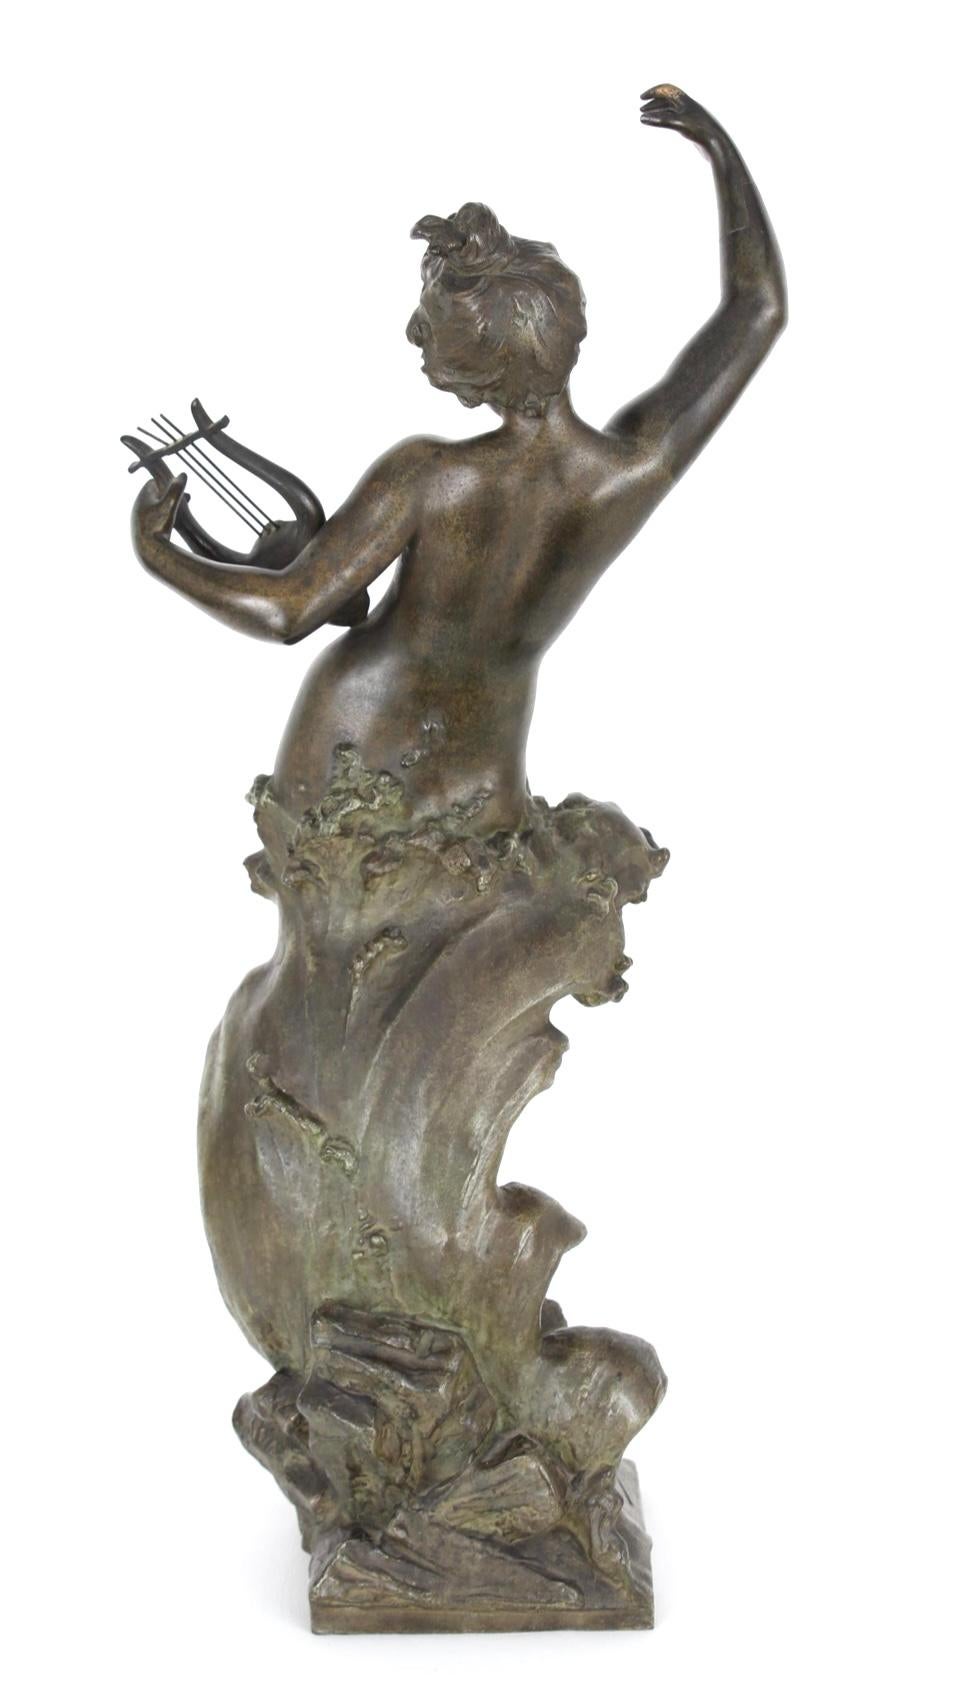 Patinated French Bronz Sculpture of Sea Nymph After Gustavo Obiols (1858-1910) For Sale